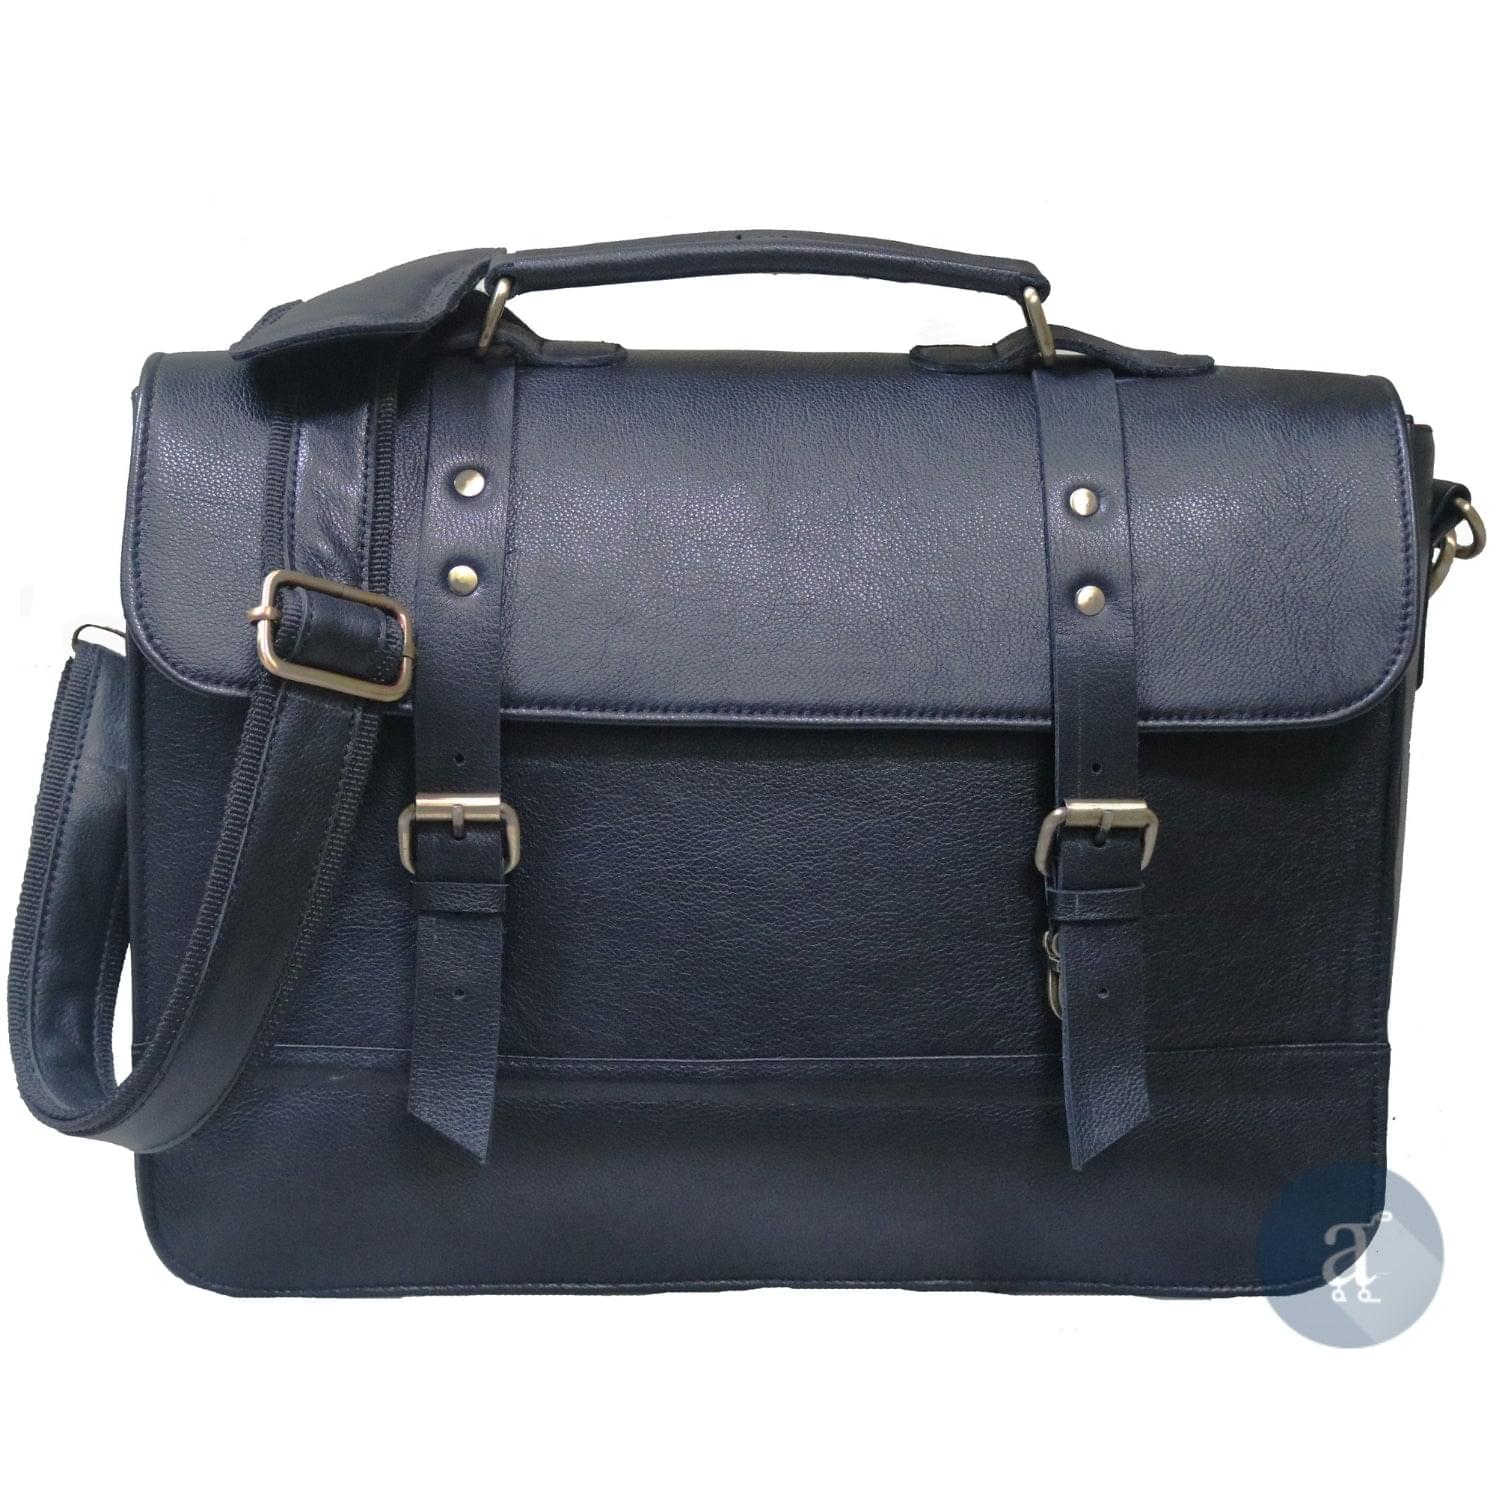 Office Bags For Men's Briefcase Business Laptop Bag 2019 Leather